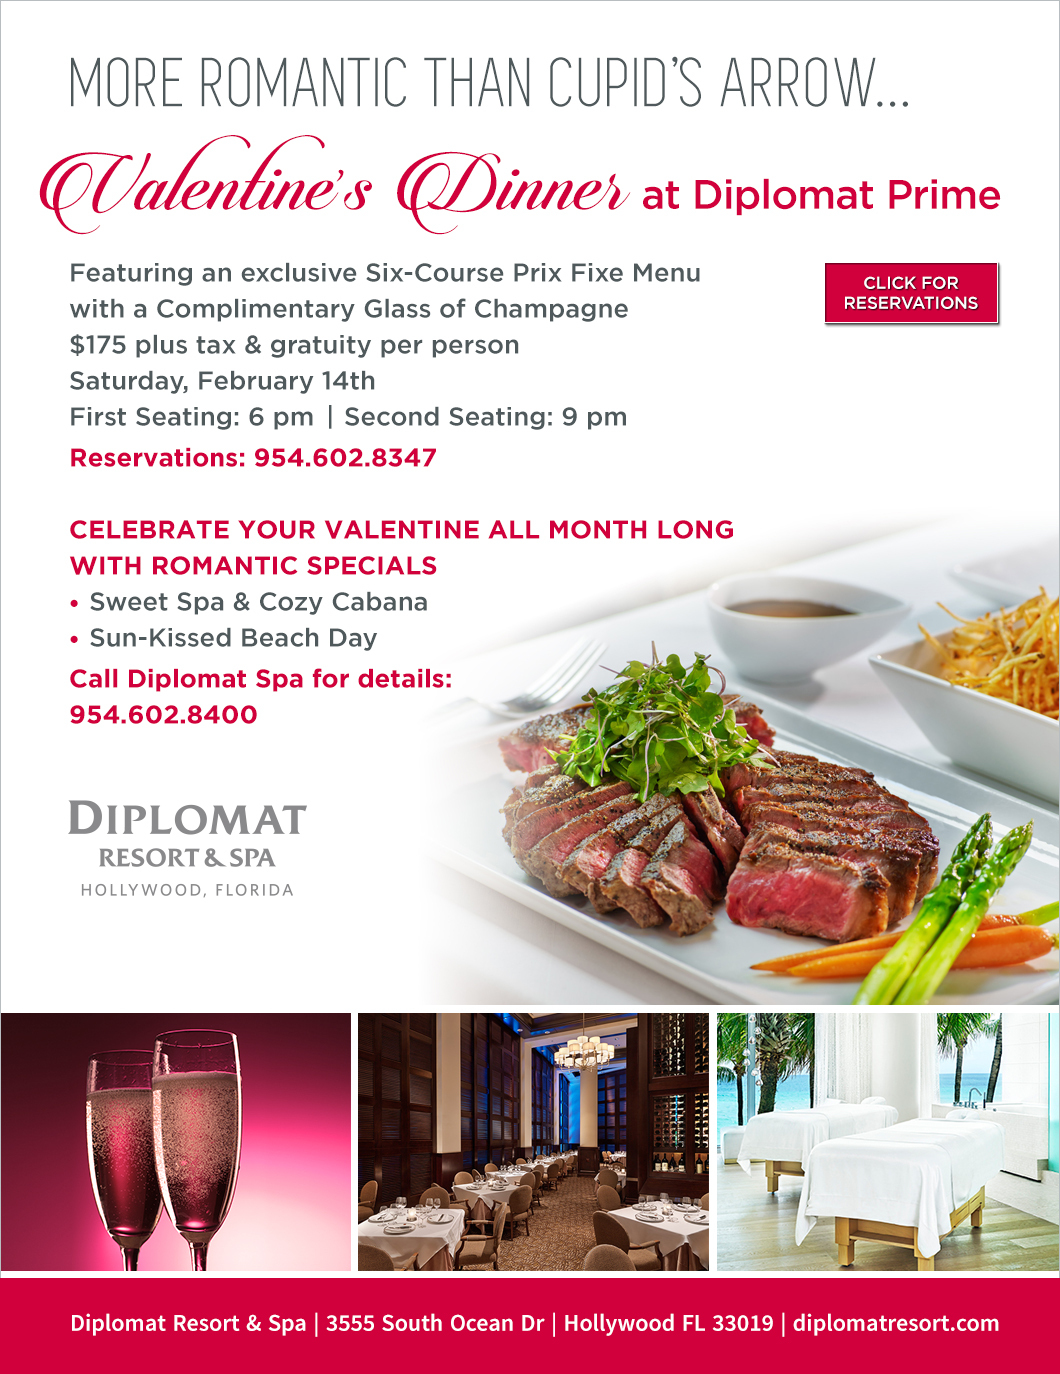 SFlor_FoodWine_eMail1030x1374_Valentines